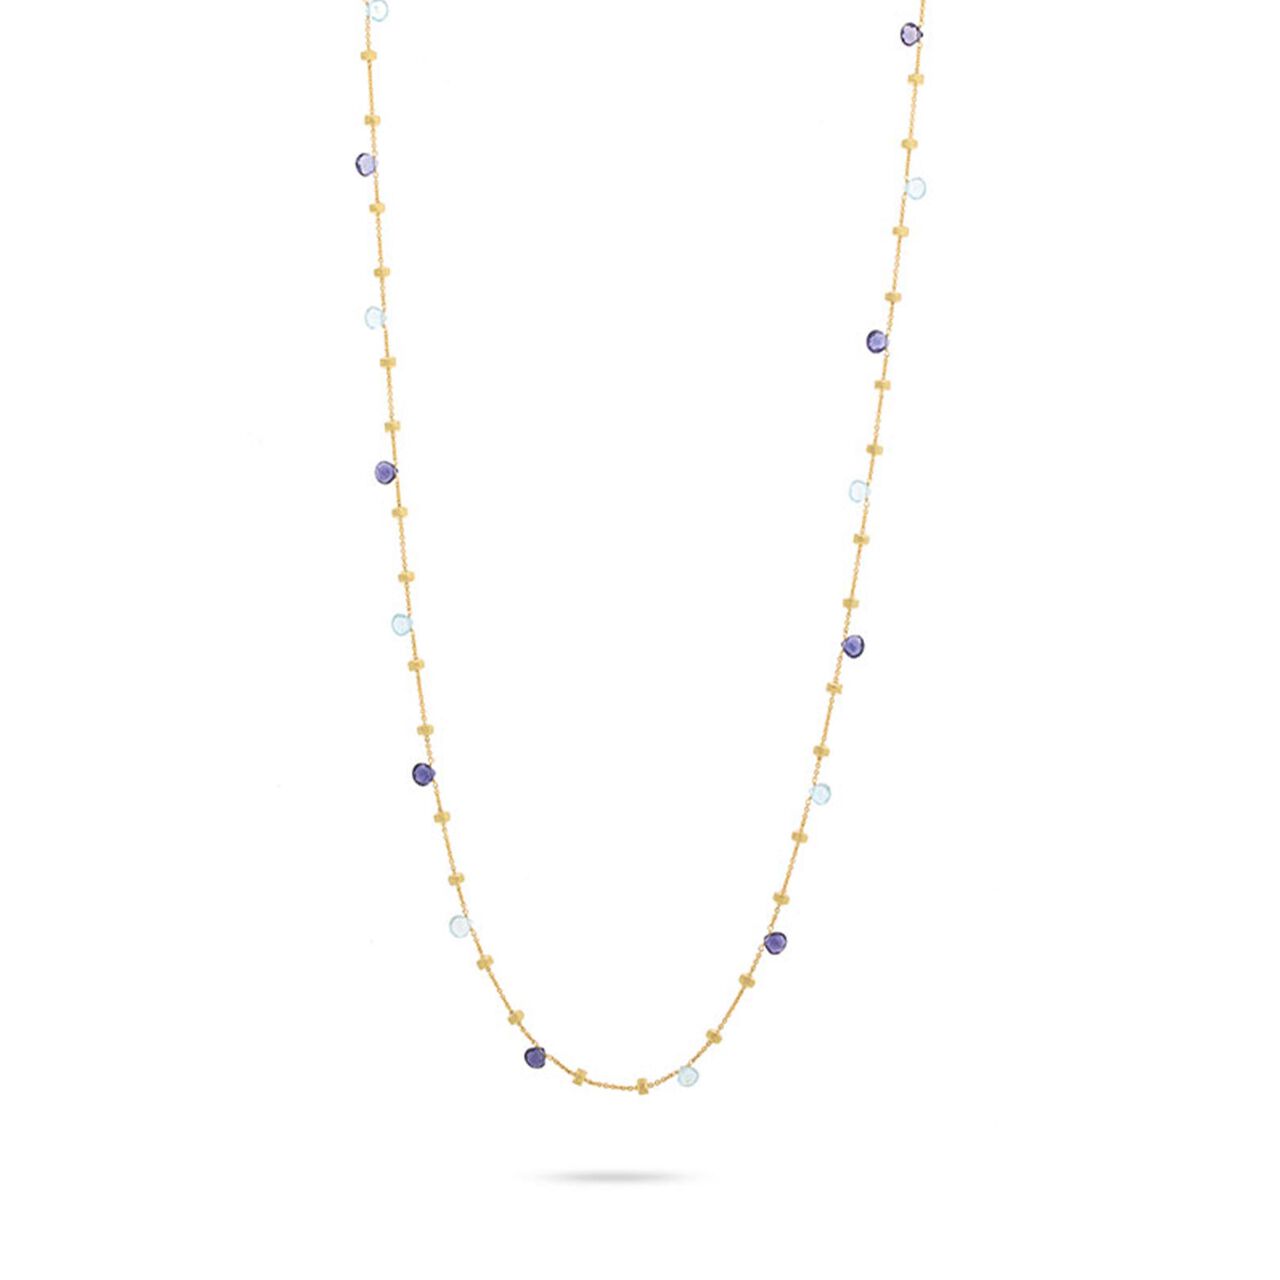 marco bicego paradise collection long yellow gold iolite and blue topaz necklace cb1199 mix240 y image number 0